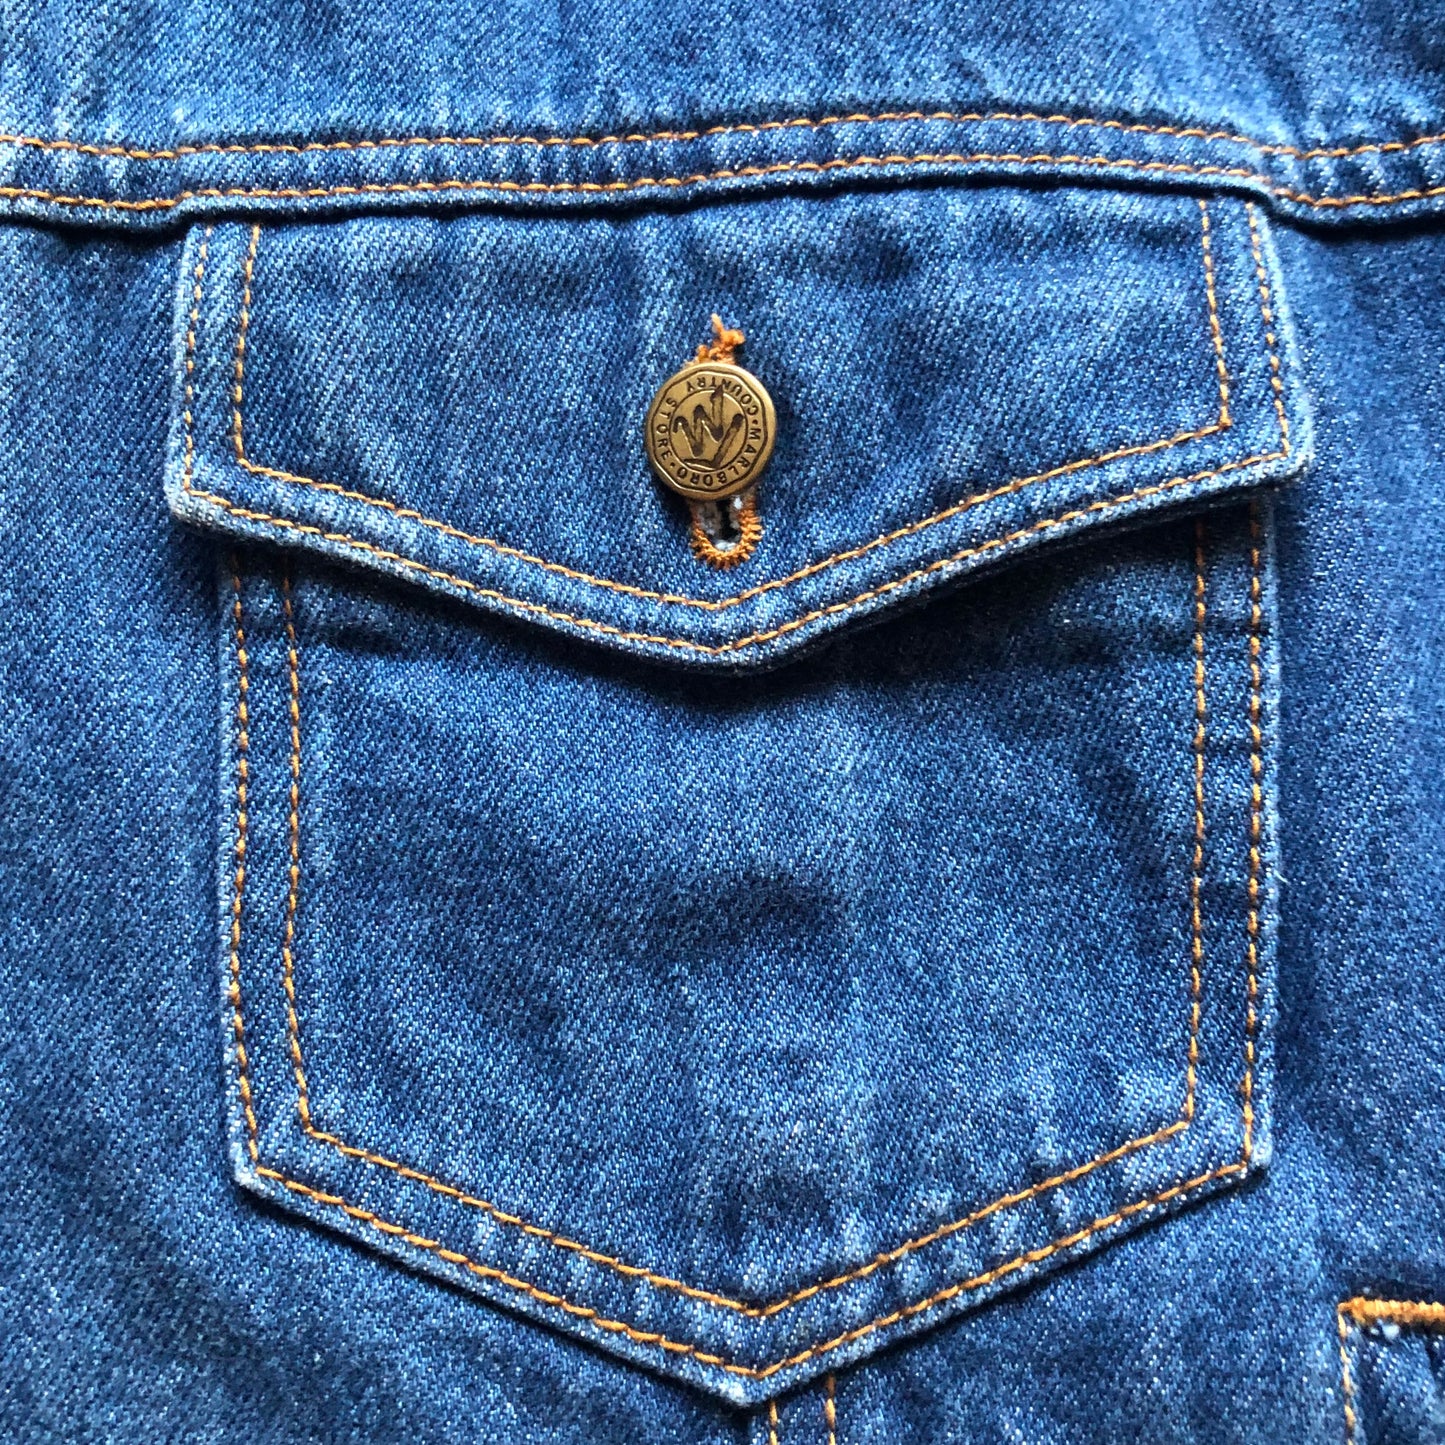 80’s Vintage Western Marlboro Country Store Denim Jacket with Leather Collar | Made in Taiwan